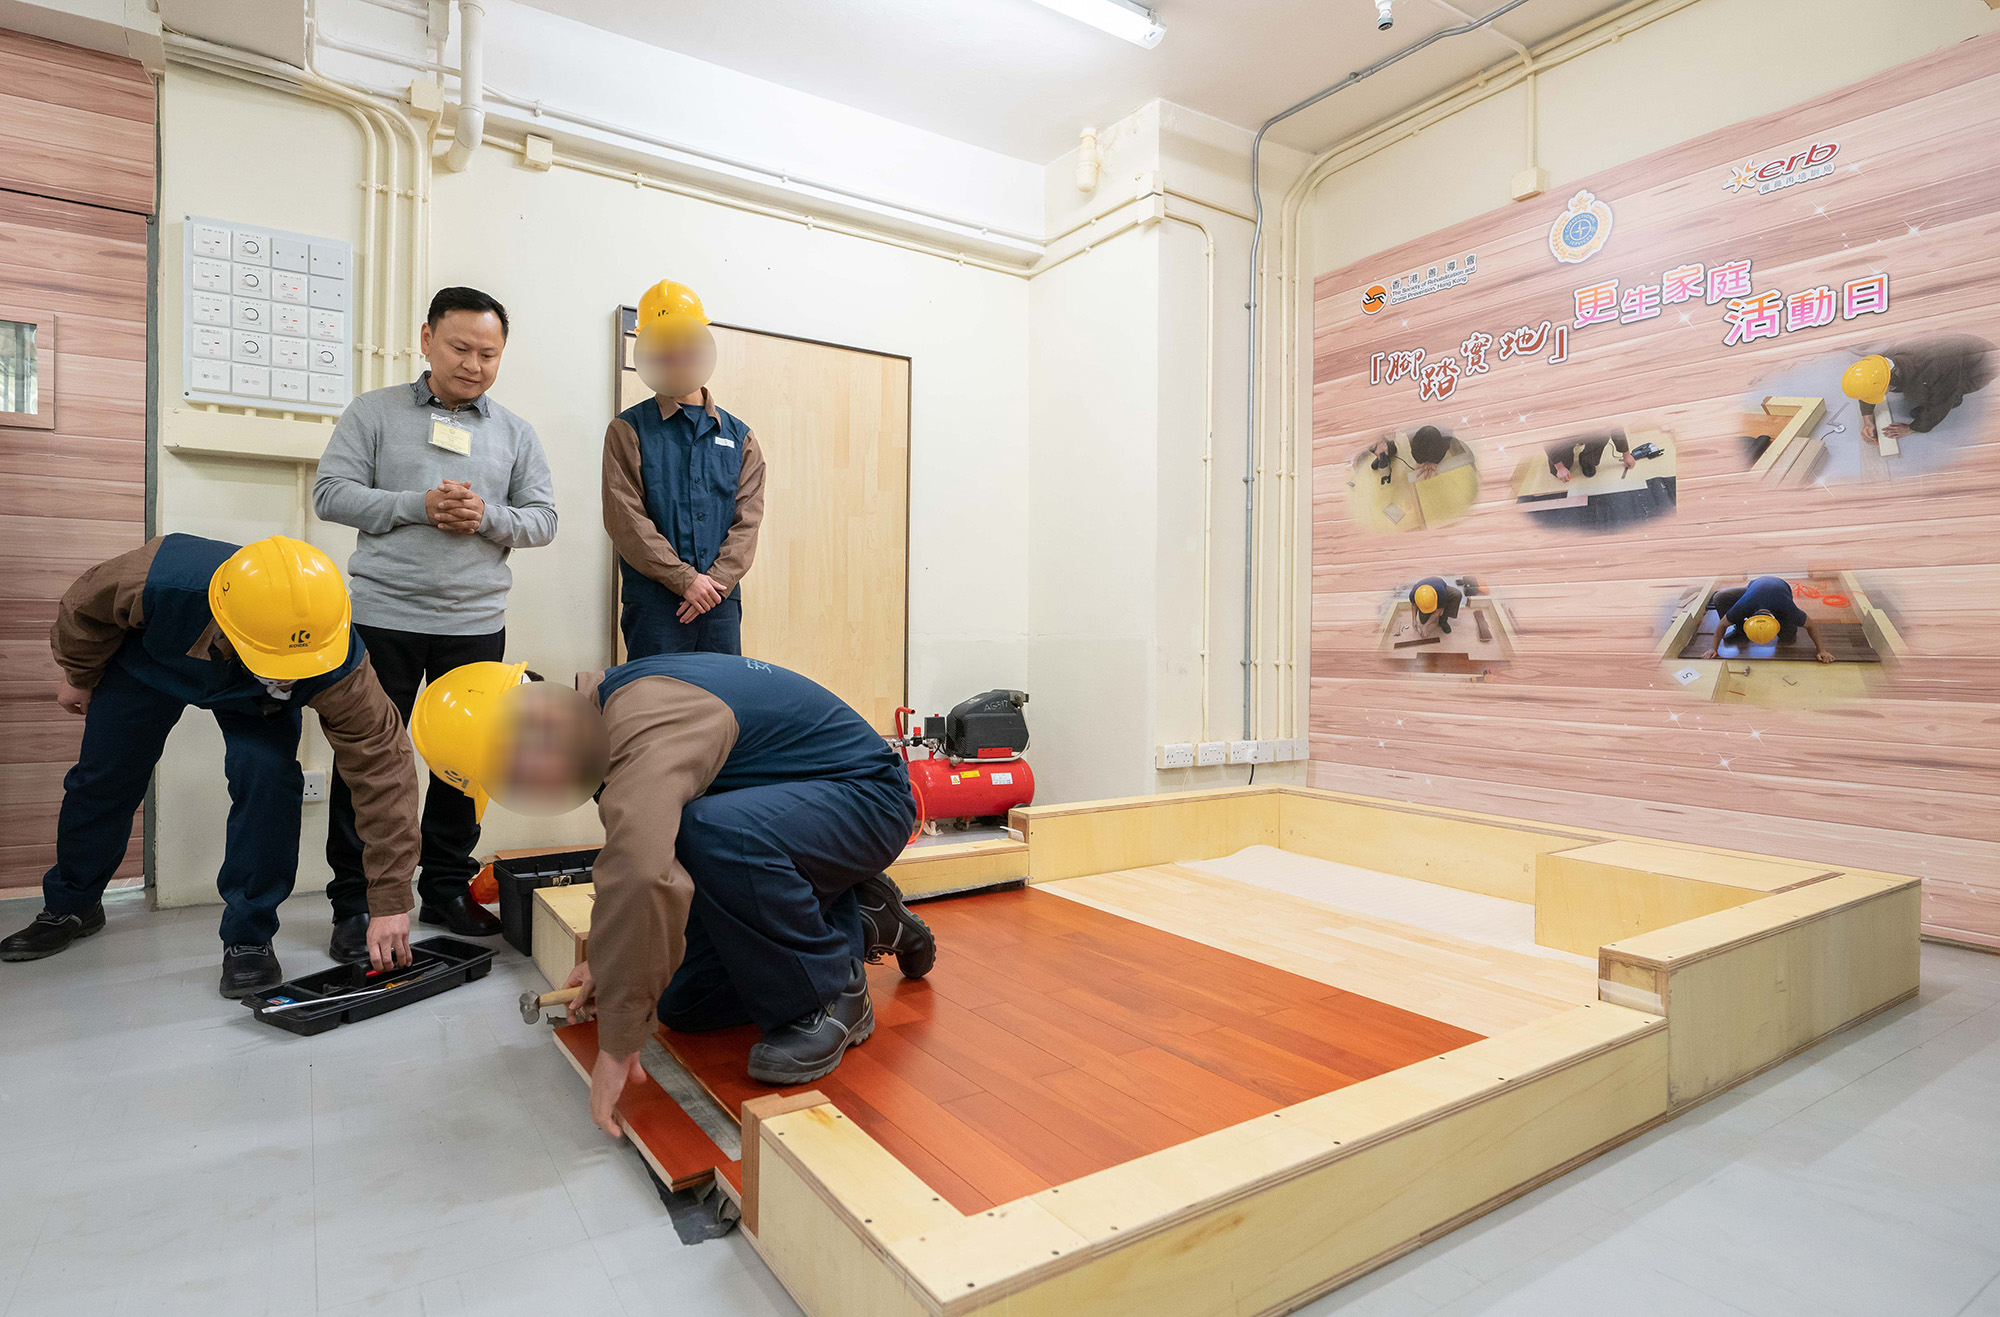 The Department introduced a new Foundation Certificate in Preparation for Intermediate Trade Test for Floor Layer (Timber Flooring) of Interior Renovation.